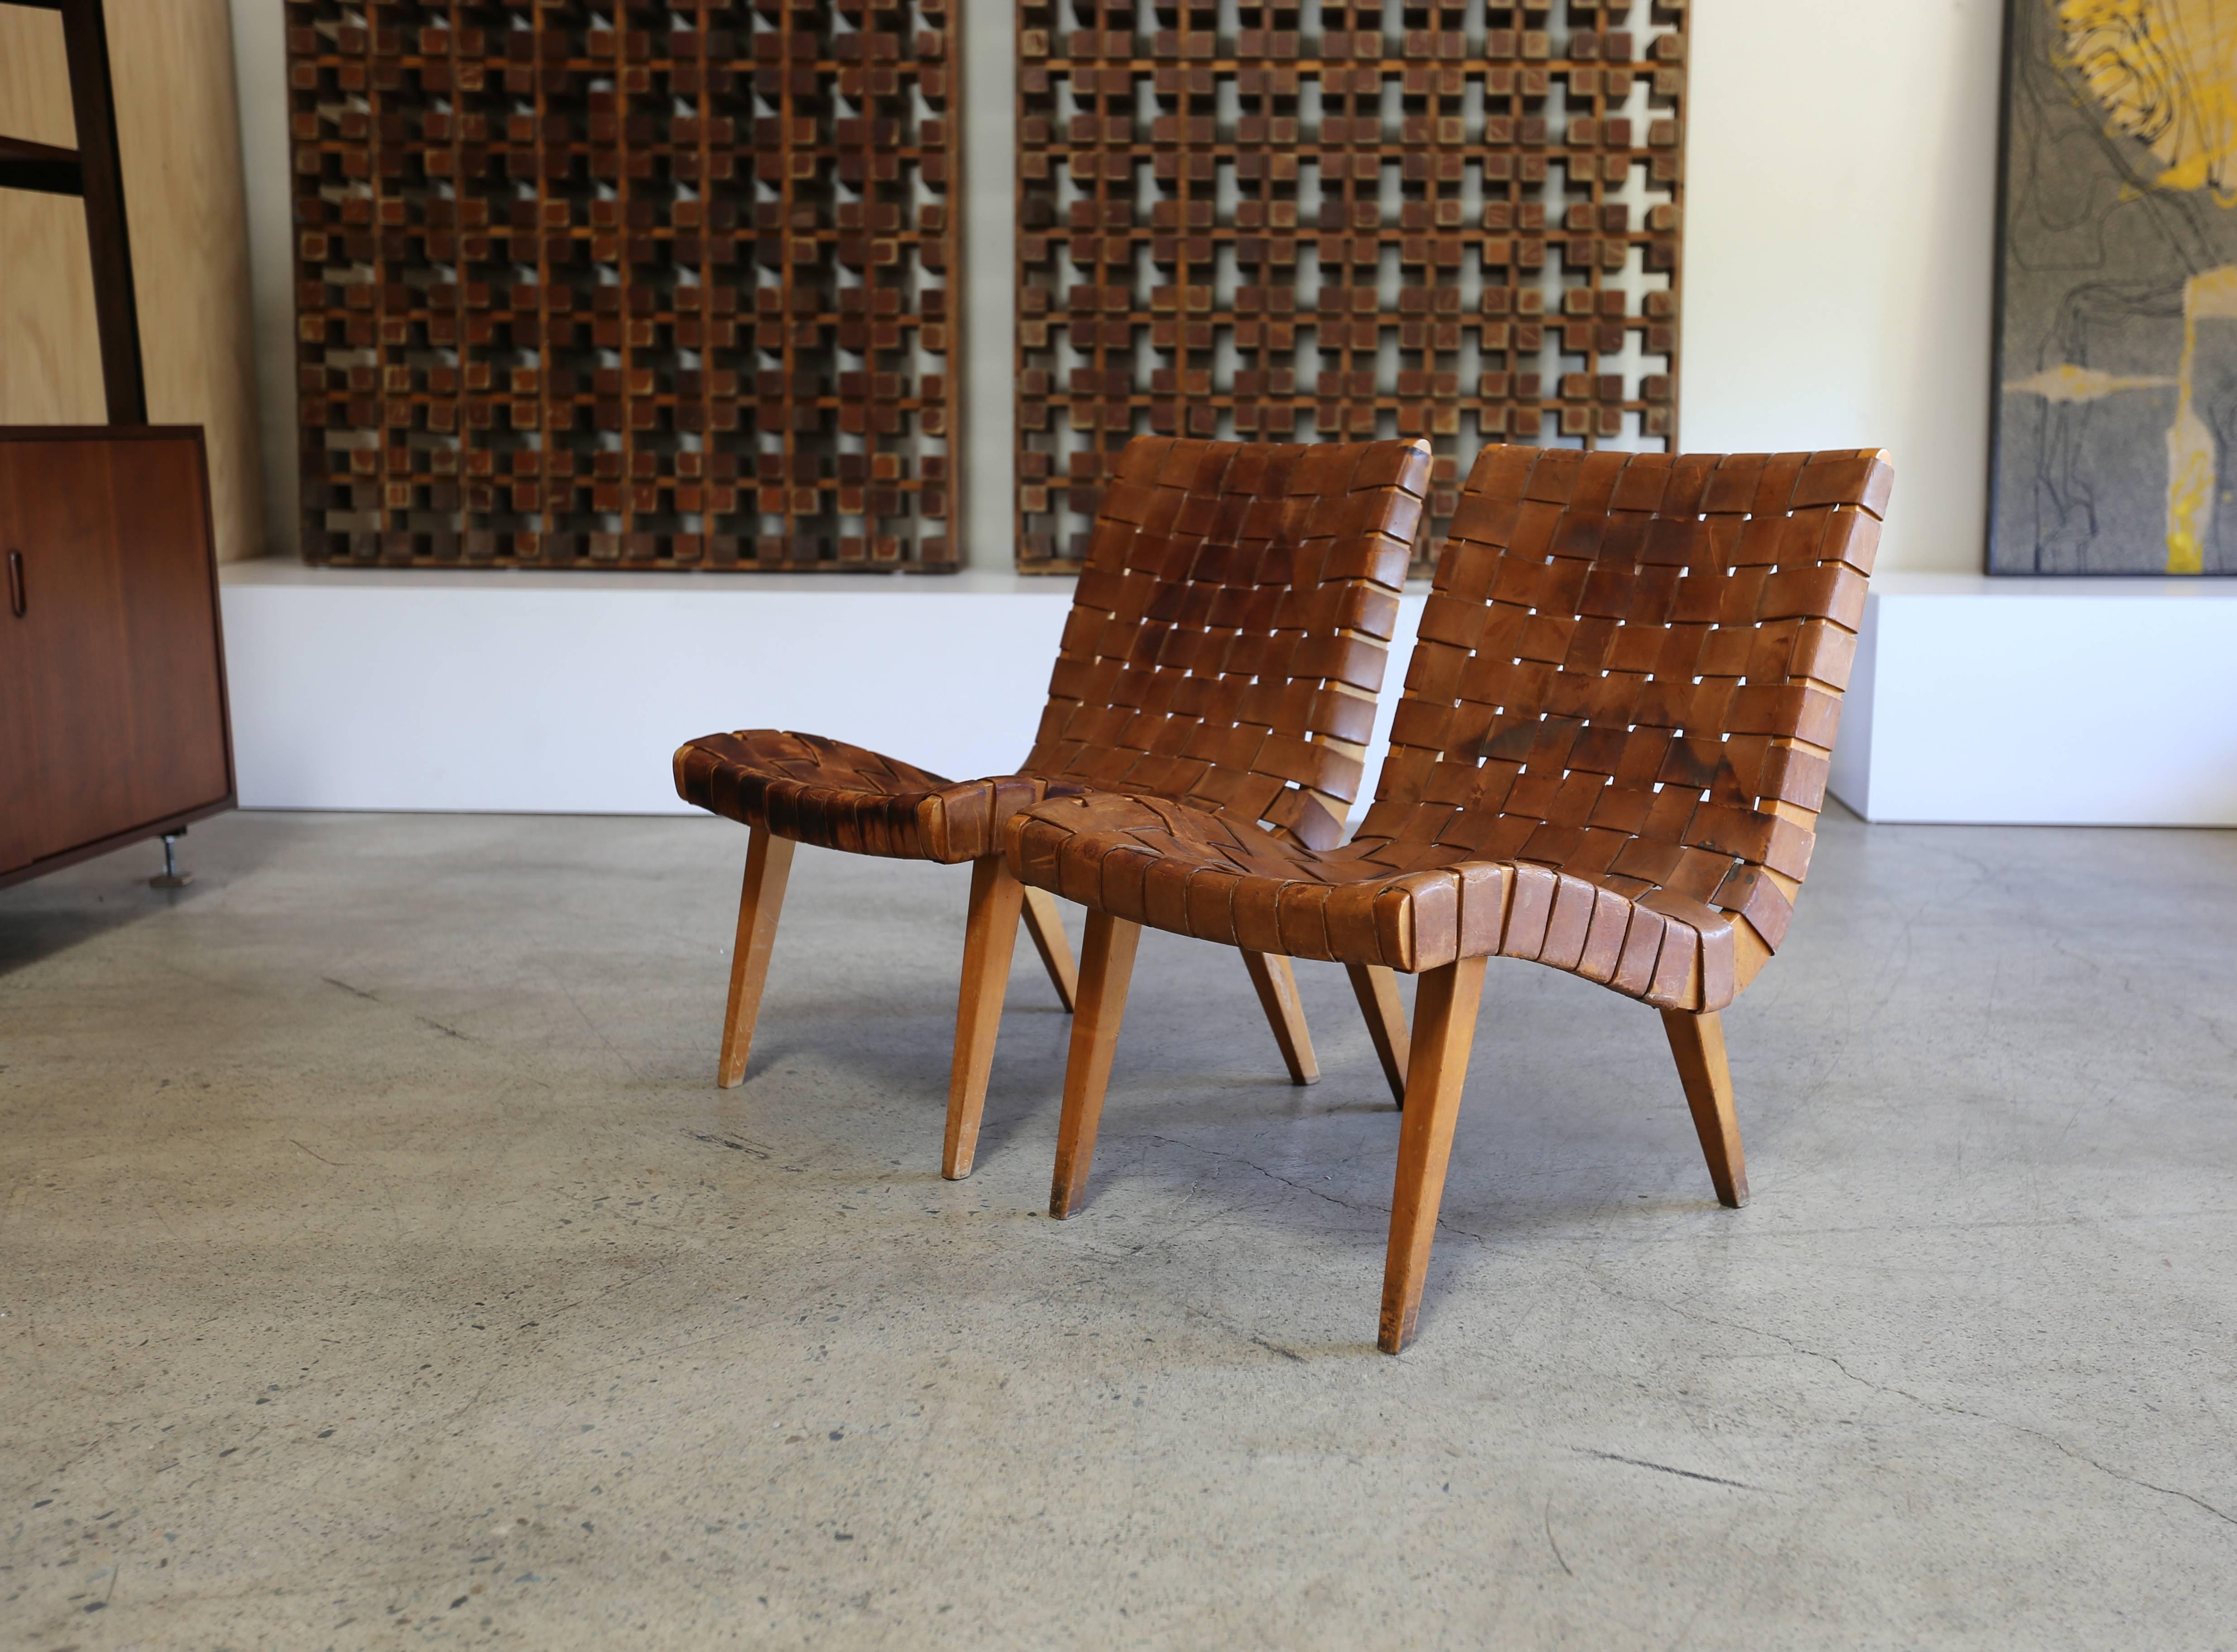 Early pair of leather strapped lounge or slipper chairs by Jens Risom for Knoll.